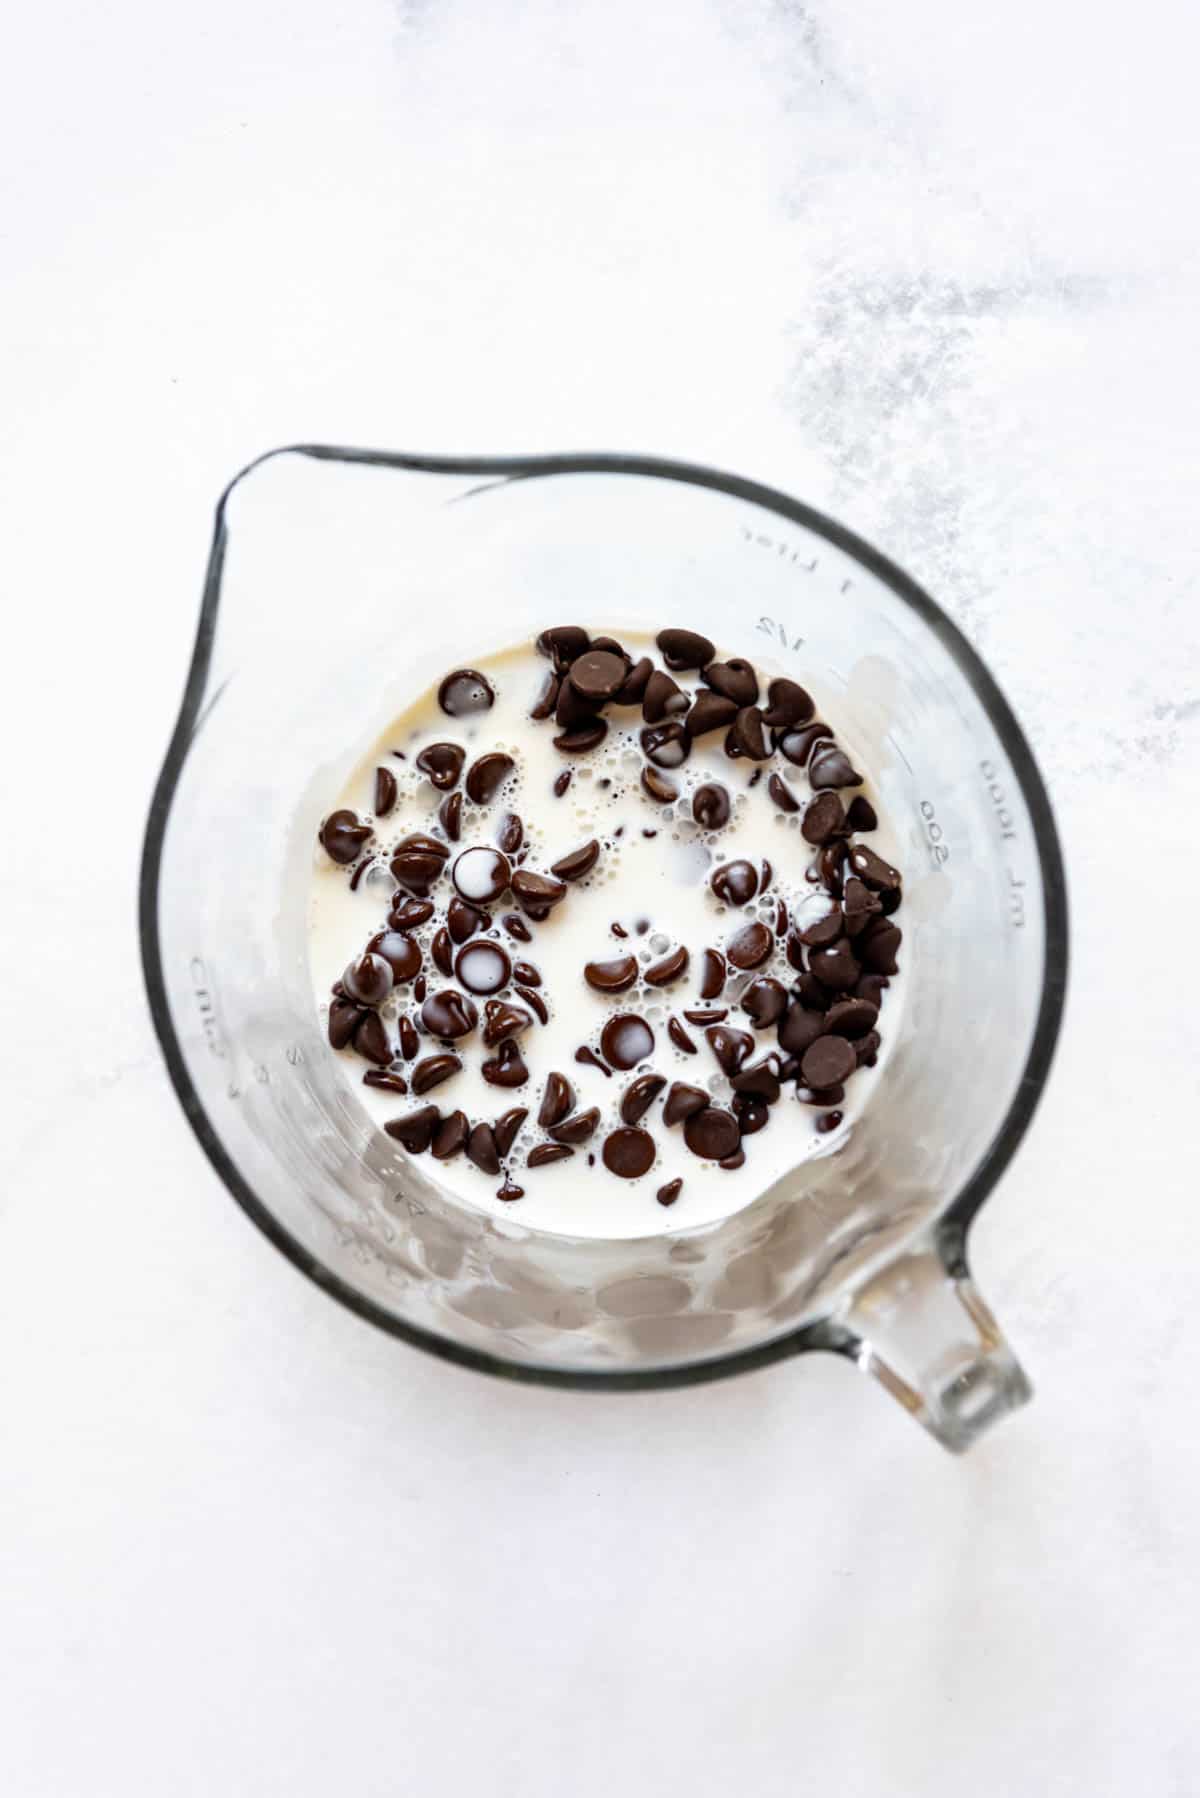 Top view of a glass mixing jug with cream and chocolate chips in it.